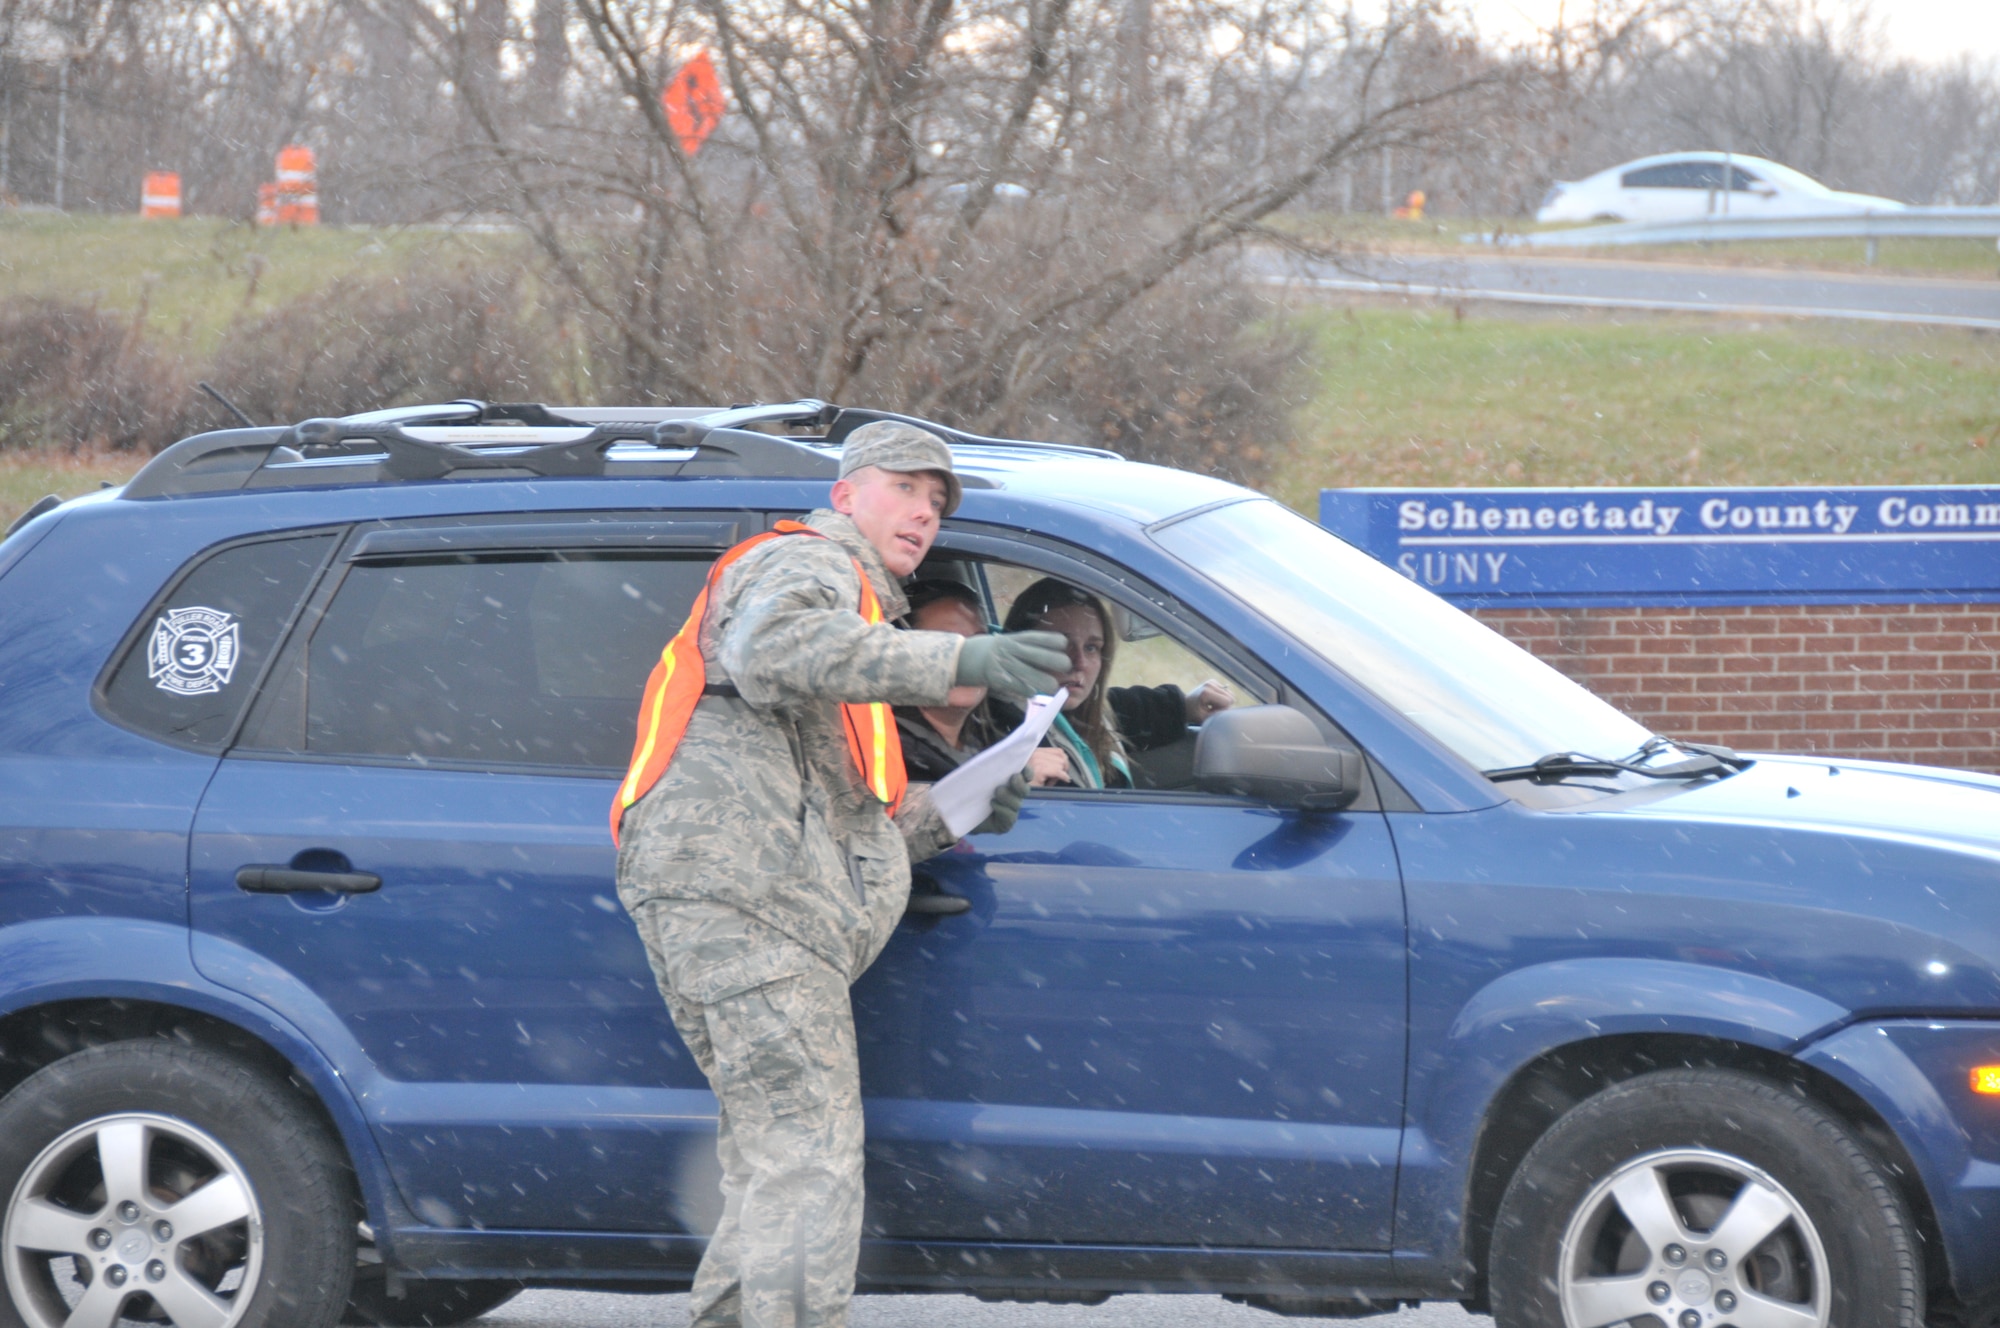 SCHENECTADY, N.Y. -- Tech. Sgt. Matthew Begin, 109th Maintenance Group, directs a parade participant where to park in preparation for the 46th annual Gazette Holiday Parade on Nov. 23, 2013. About 20 volunteers with the 109th Airlift Wing, including some family members, volunteered to help usher the floats in for the parade. (Air National Guard photo by Tech. Sgt. Catharine Schmidt/Released)